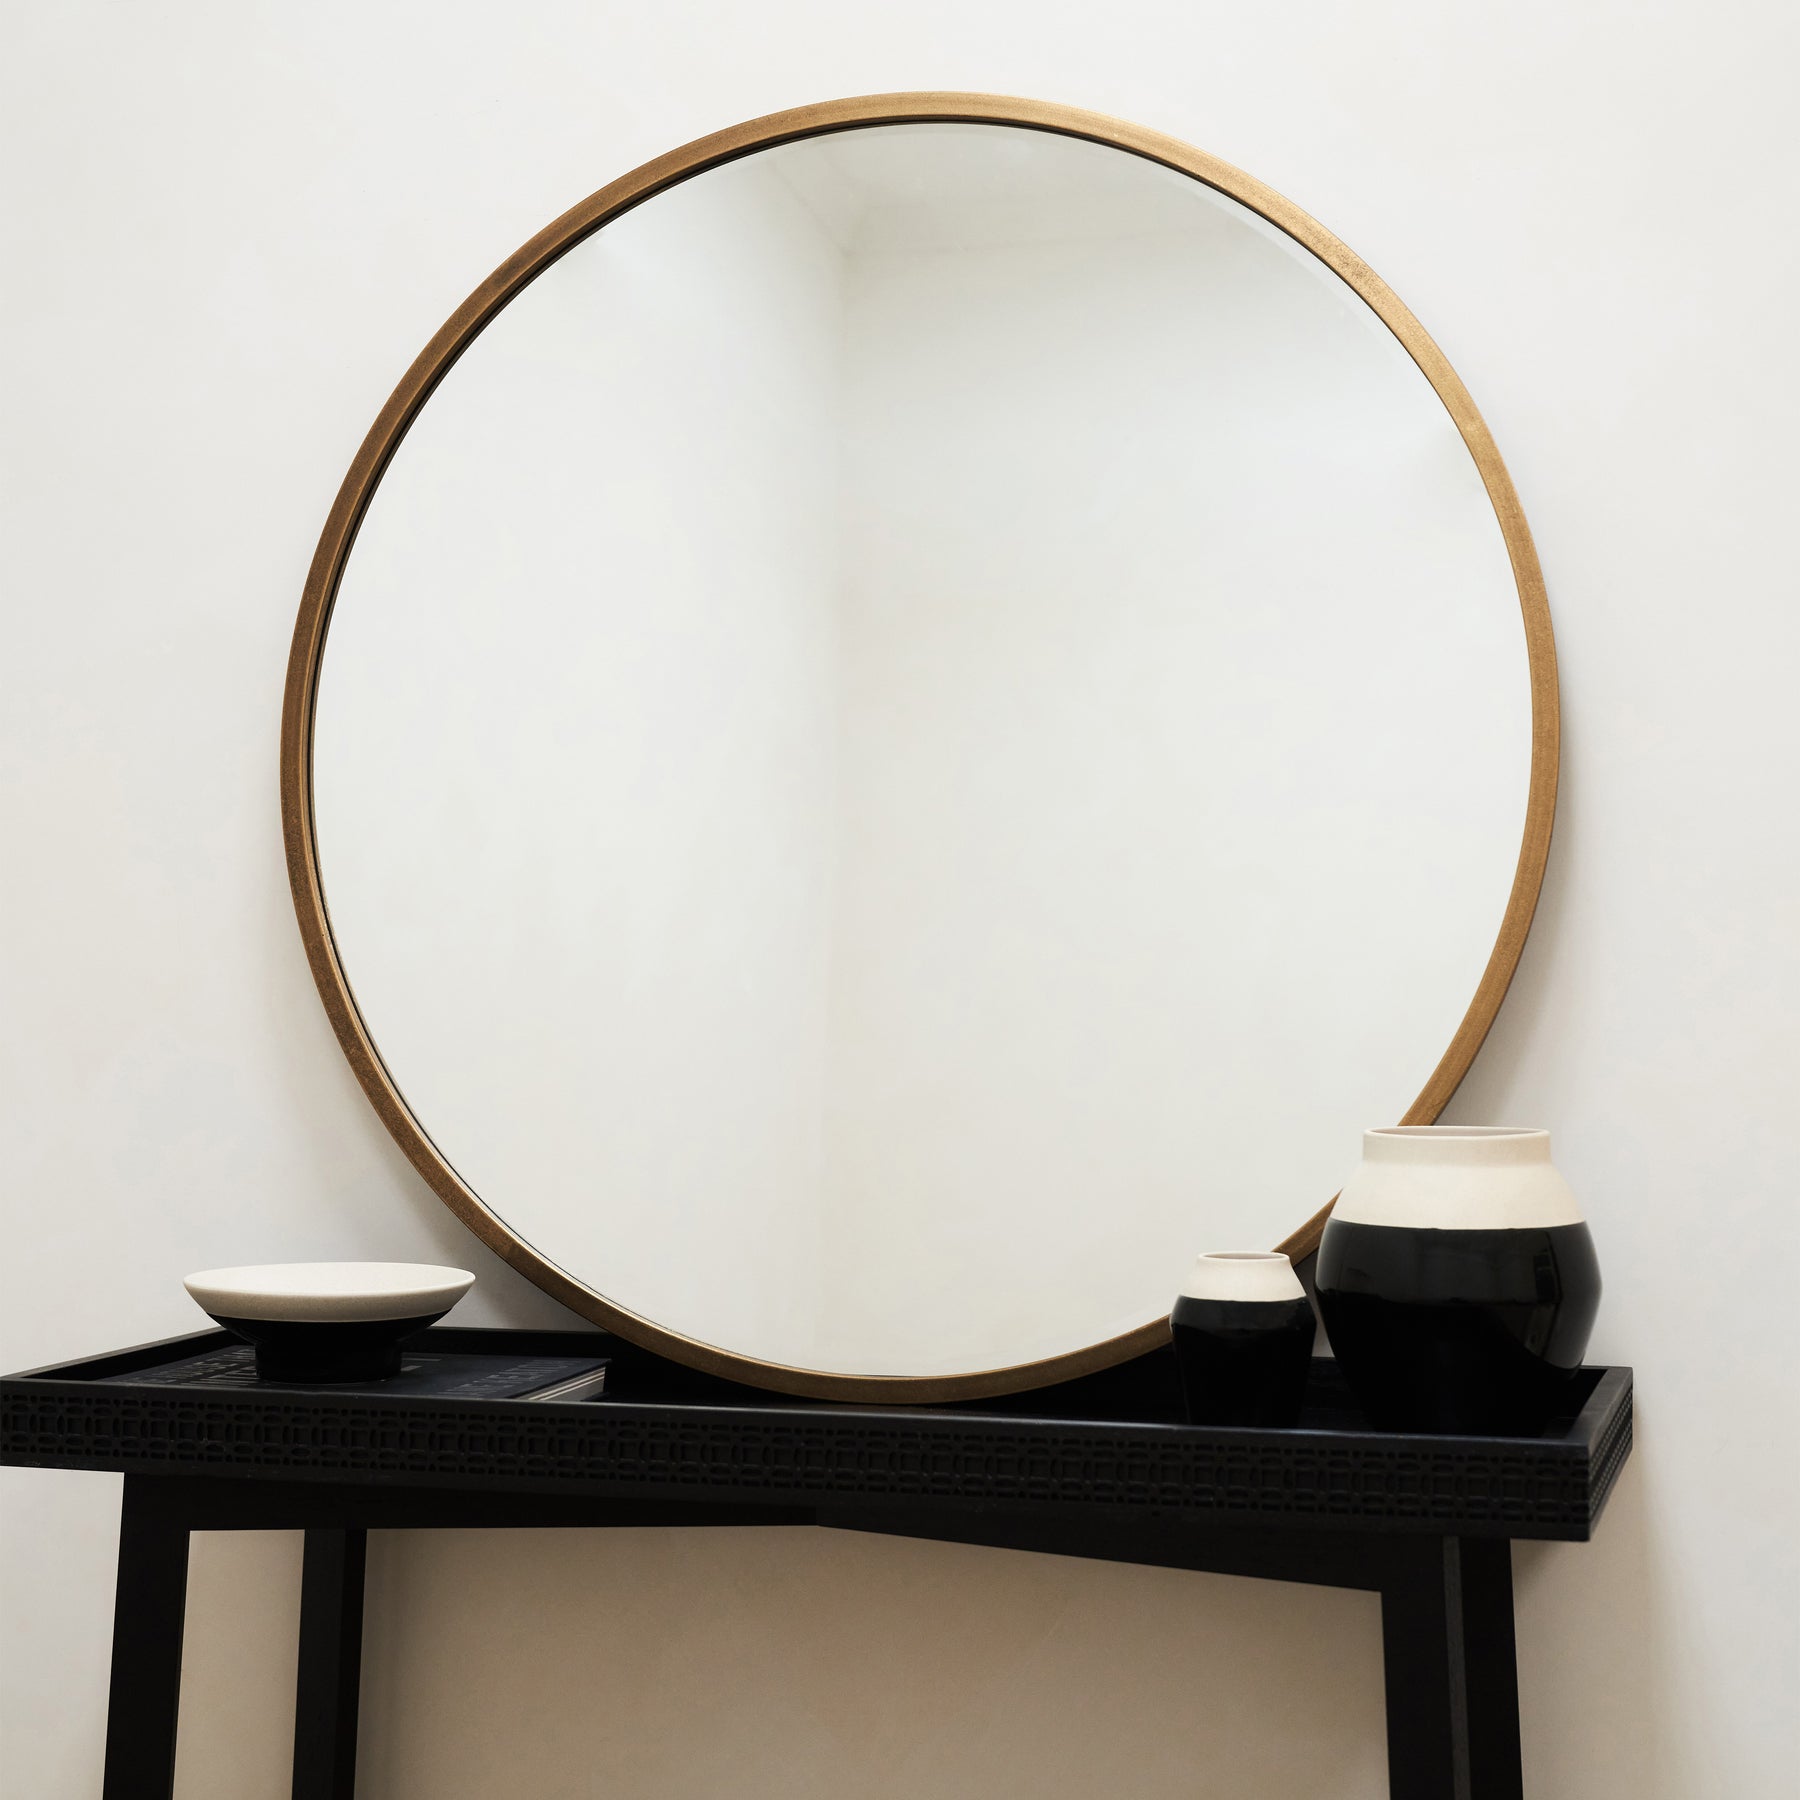 Gold Metal Modern Round Wall Mirror on console table